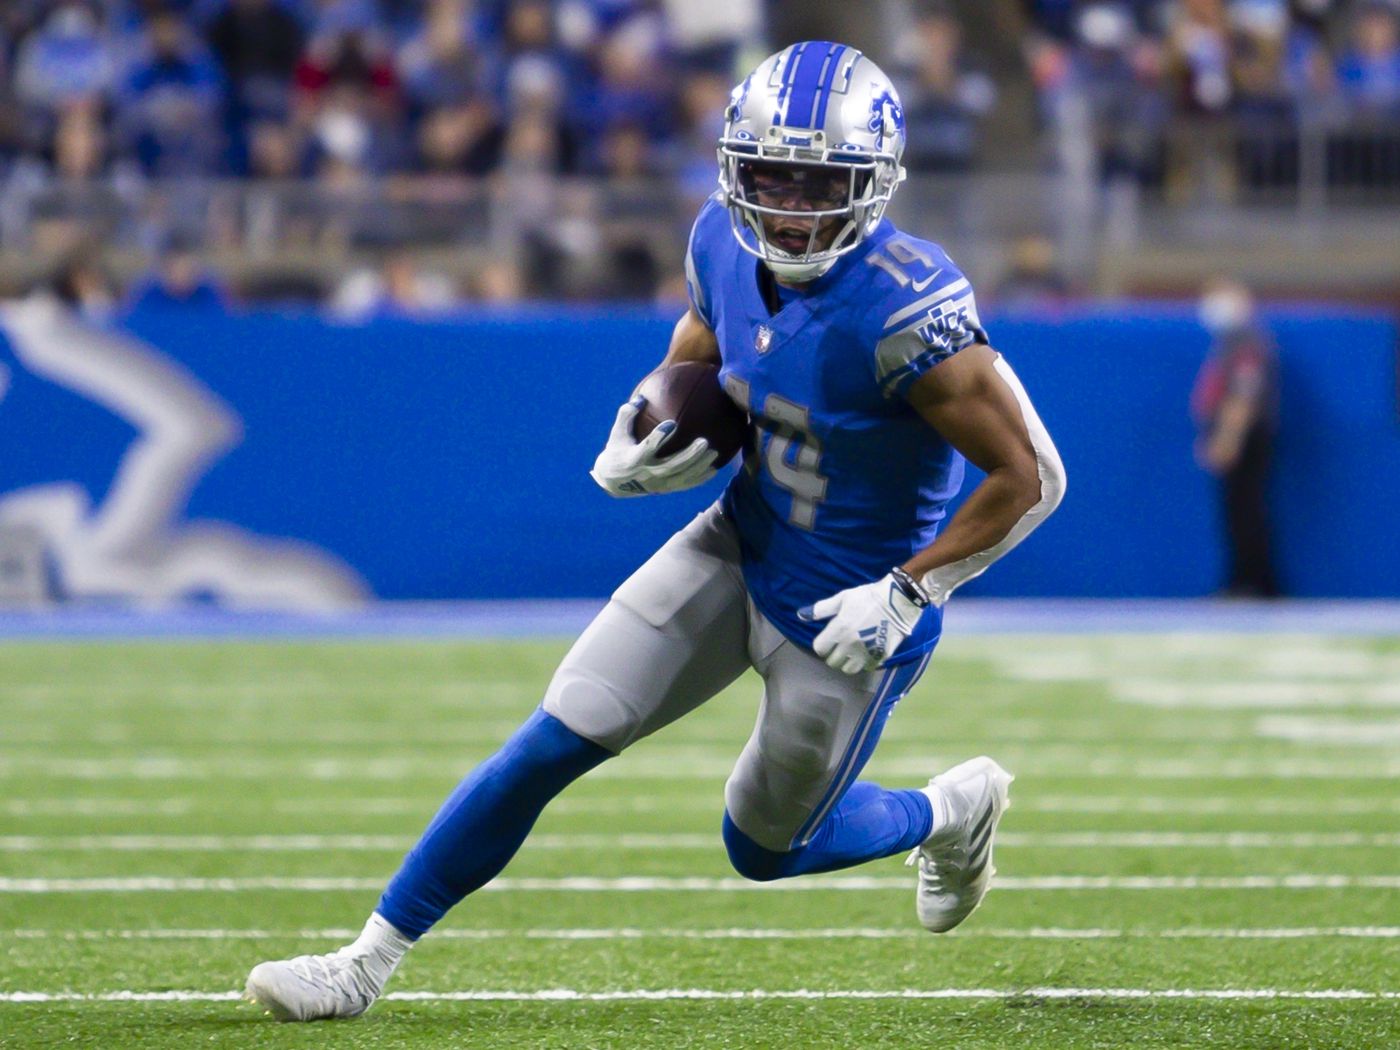 Amon Ra St. Brown Fantasy Football Start Sit Advice: What To Do With Lions WR In Week 13